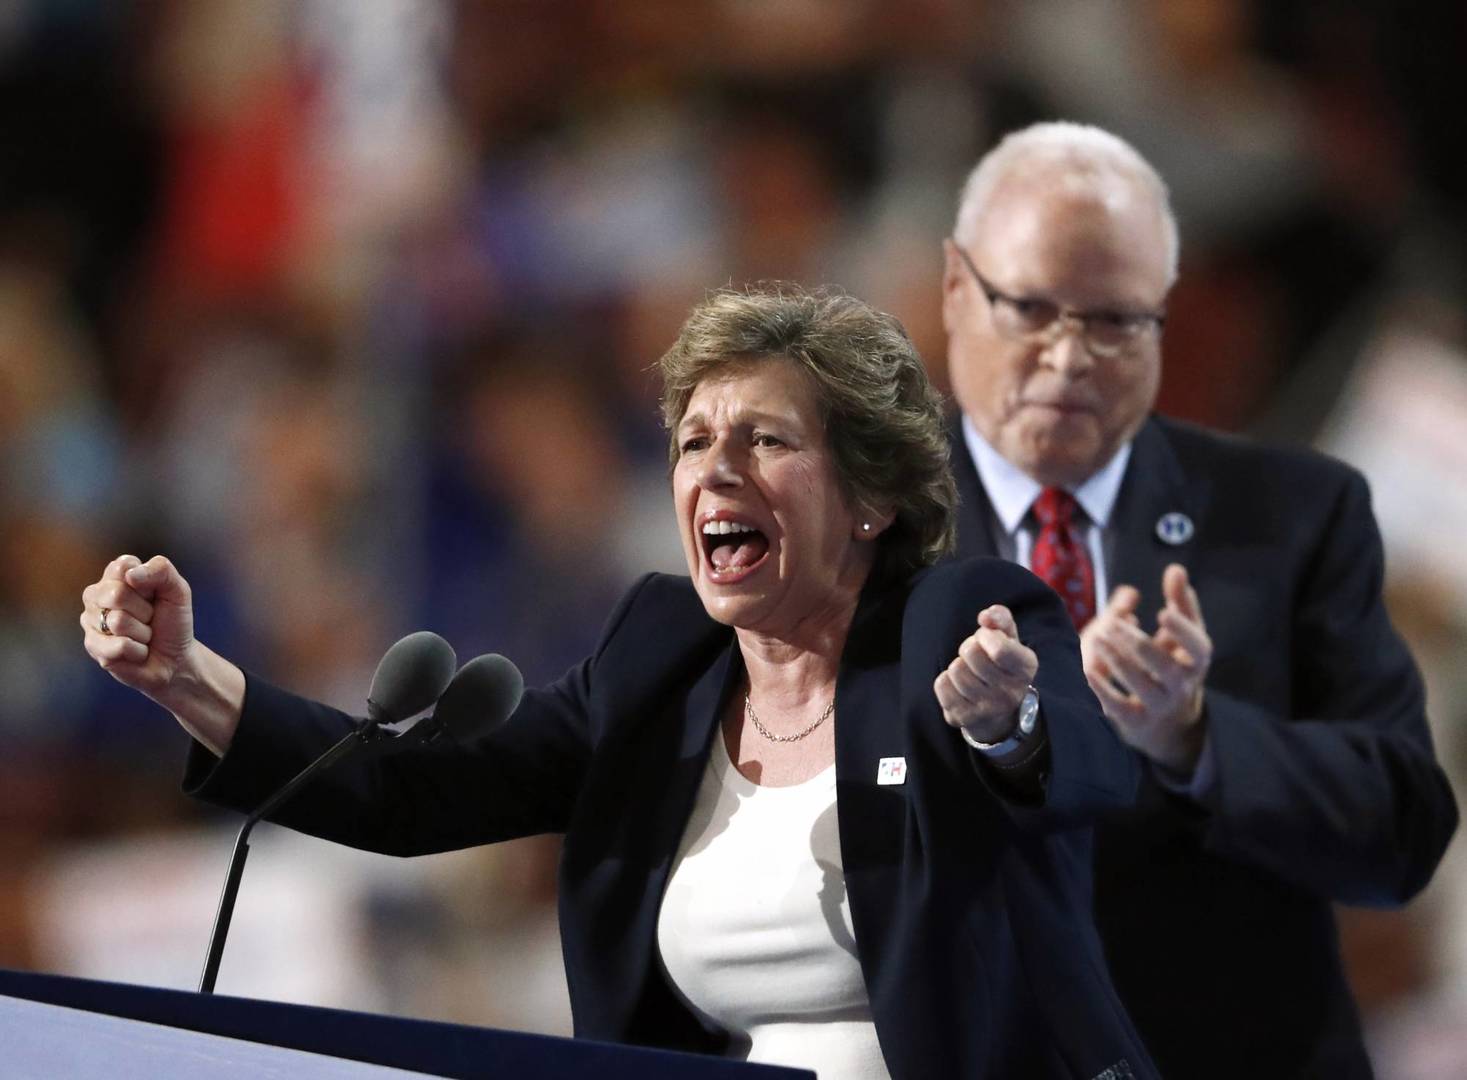 FILE - In this Monday, July 25, 2016, file photo, Randi Weingarten, president of American Federation of Teachers, speaks as Lee Saunders, president of American Federation of State, County and Municipal Employees, applauds during the first day of the Democratic National Convention in Philadelphia. Union membership among public employees has fallen only slightly in the nation’s most unionized states since the Supreme Court ruled in 2018 that government workers no longer could be required to pay union fees, according to an analysis of federal data conducted for The Associated Press. (AP Photo/Paul Sancya, File)